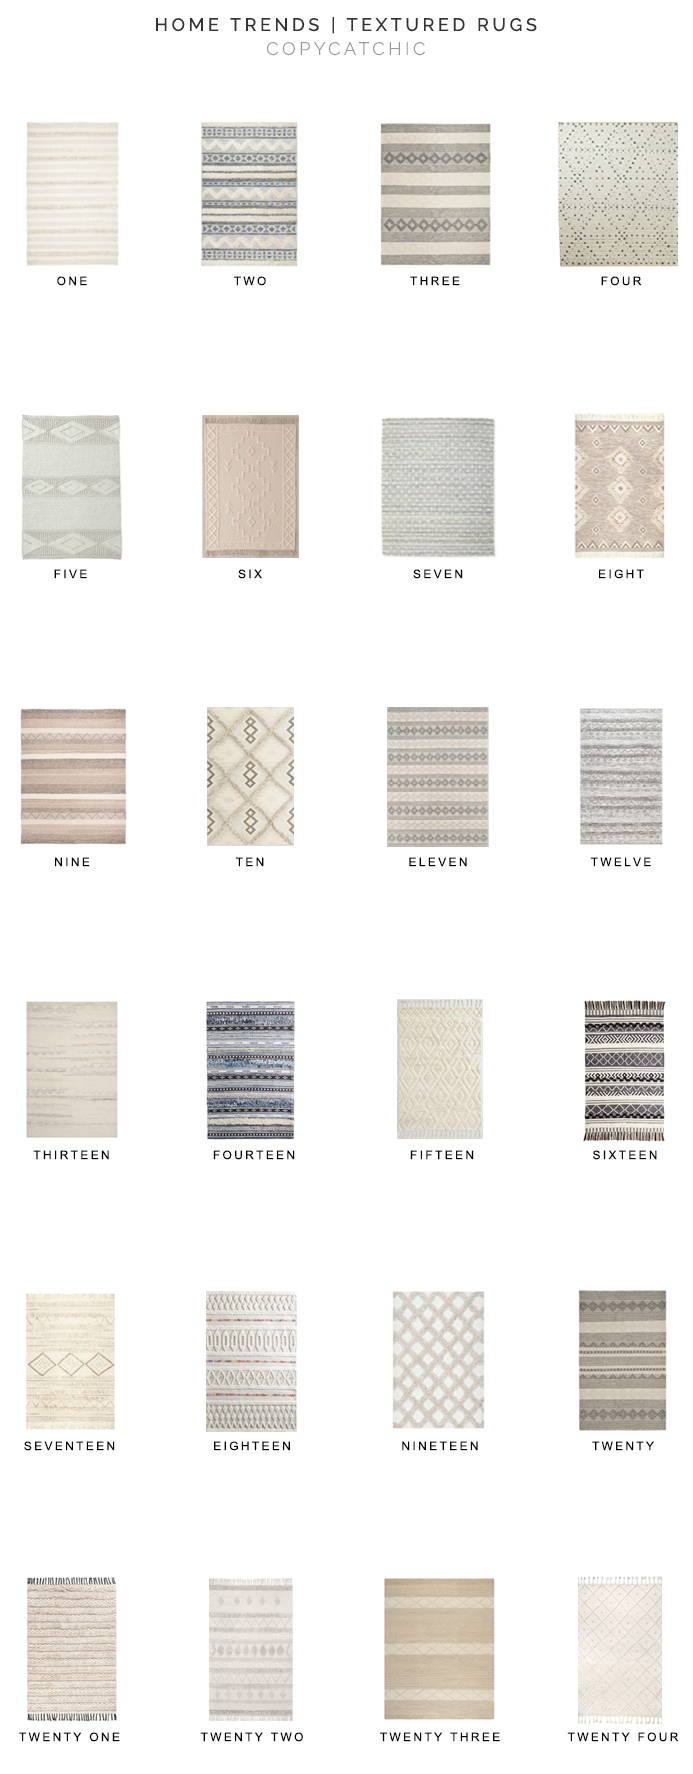 textured rugs for less, copycatchic luxe living for less, budget home decor and design, daily finds, home trends, sales, budget travel and room redos